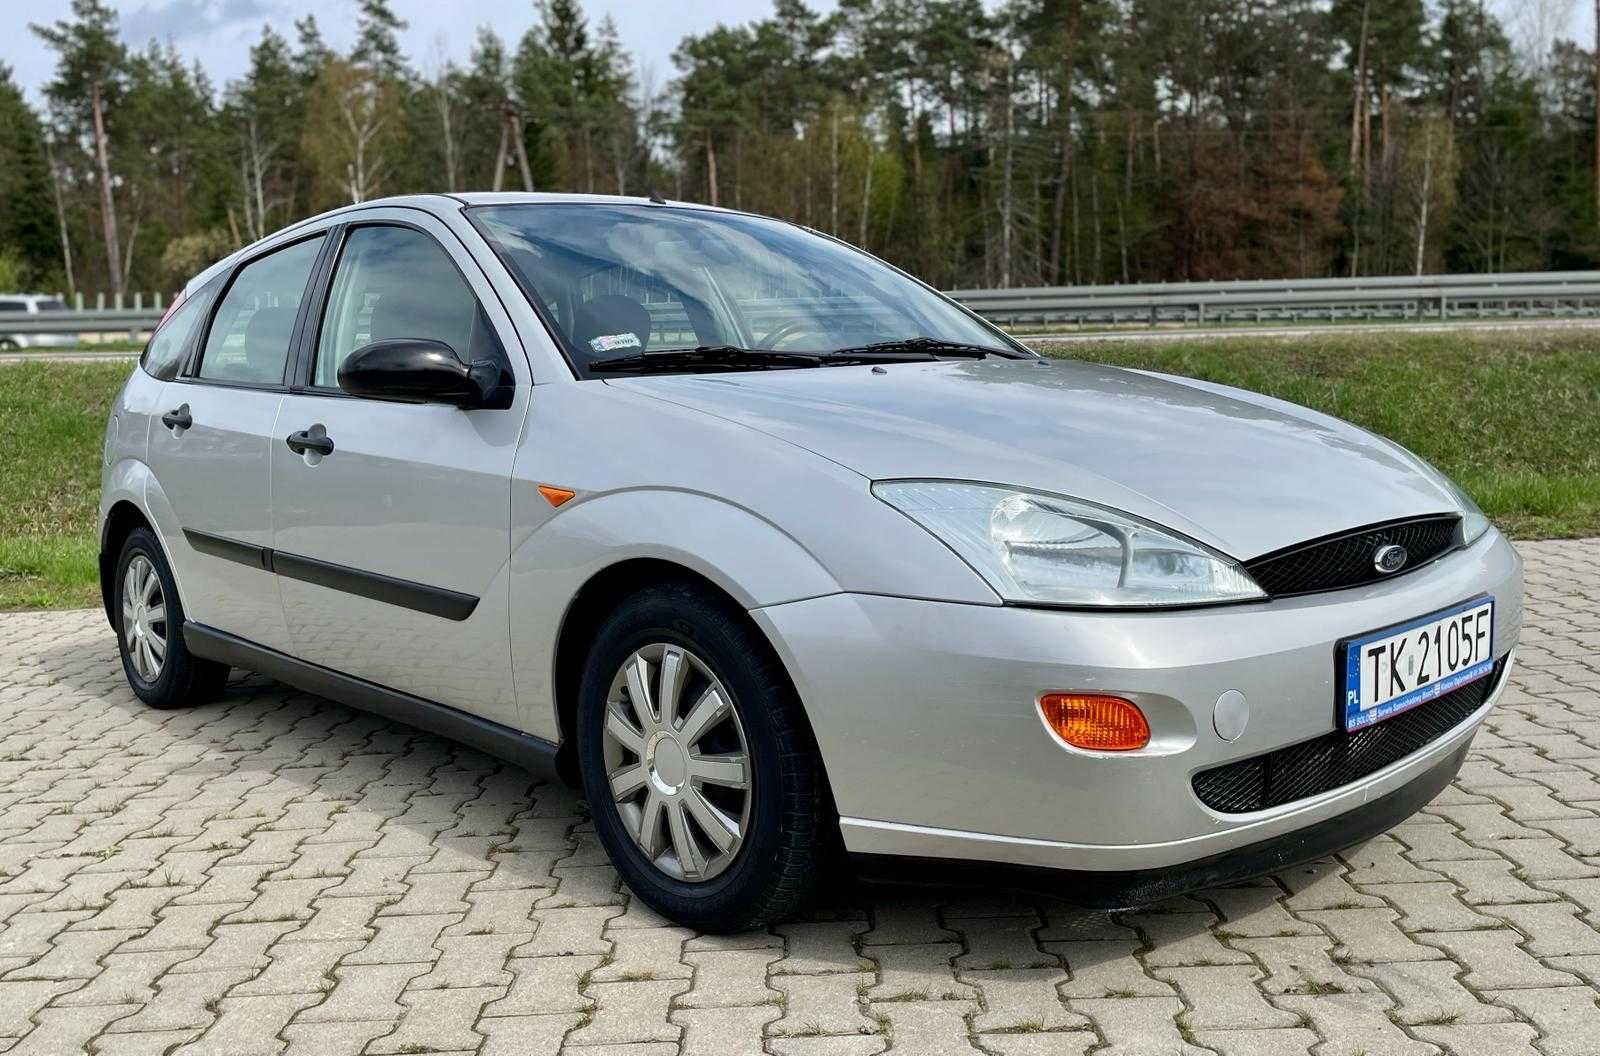 Ford Focus 1.8 Benzyna 2001 R